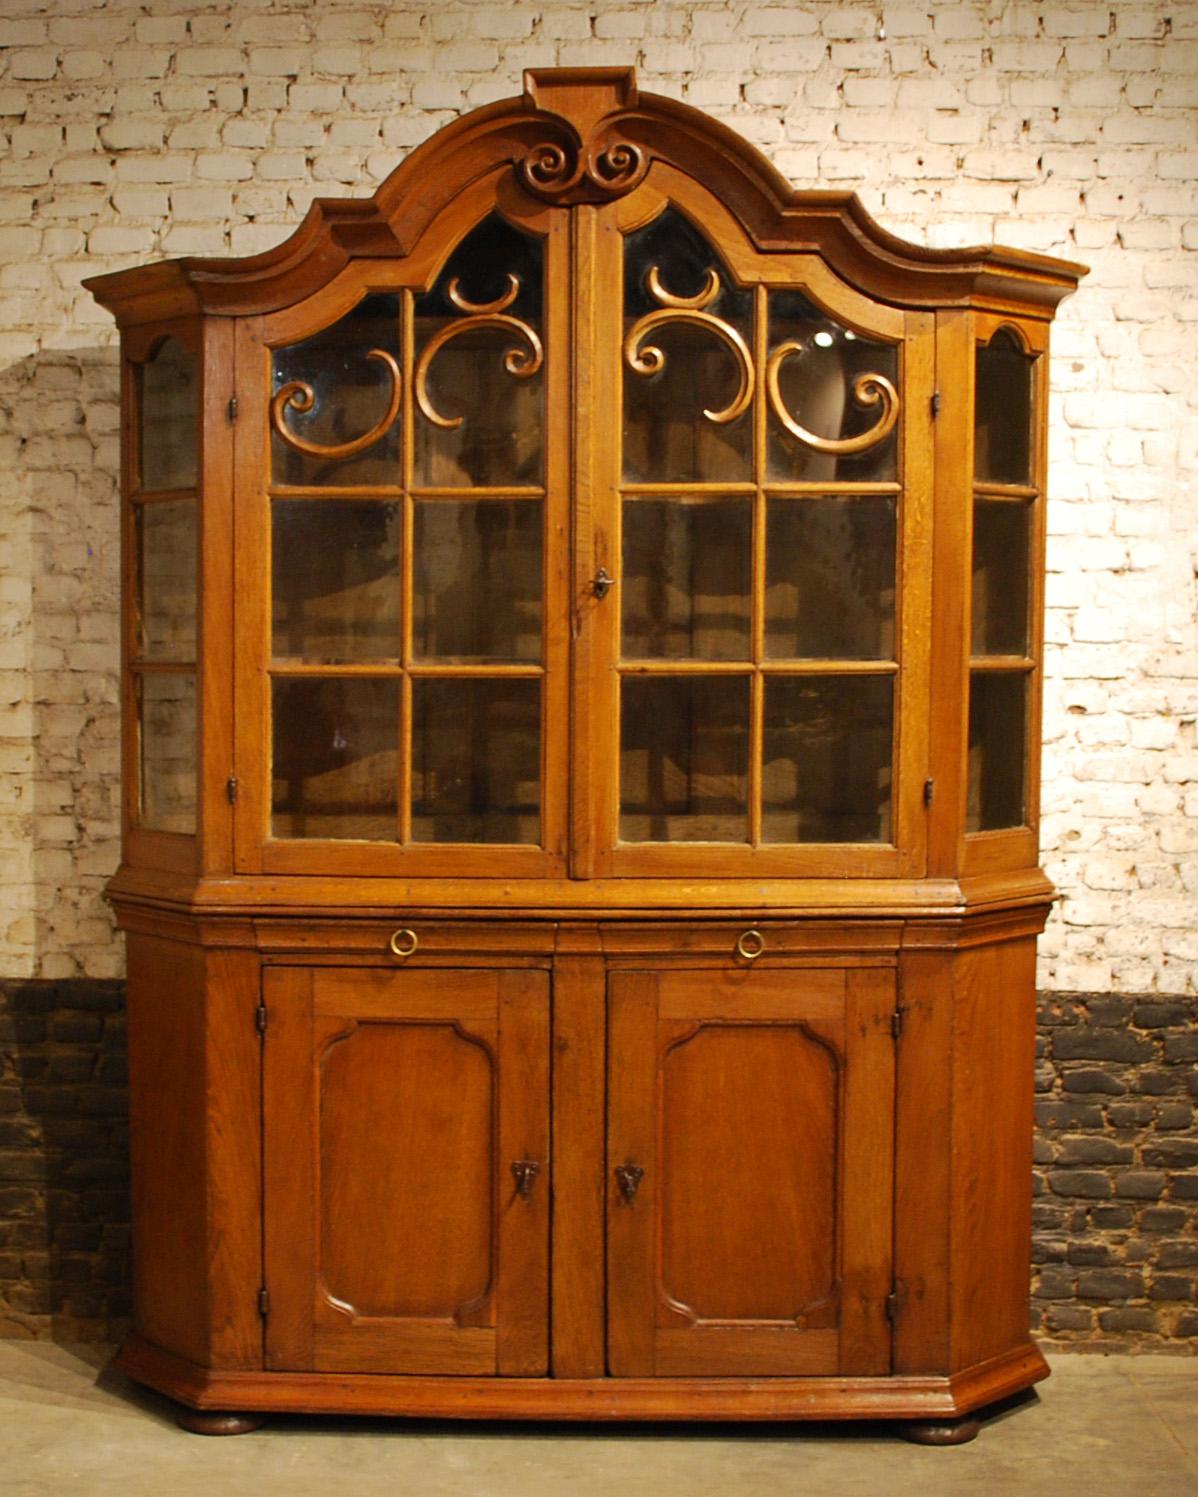 This German Baroque display or kitchen cabinet has a beautiful warm honey color with soft gloss and rich patina.
The cabinet has wide canted corners and a stepped pediment above two glass inset doors in the upper cabinet. Note the small proportion